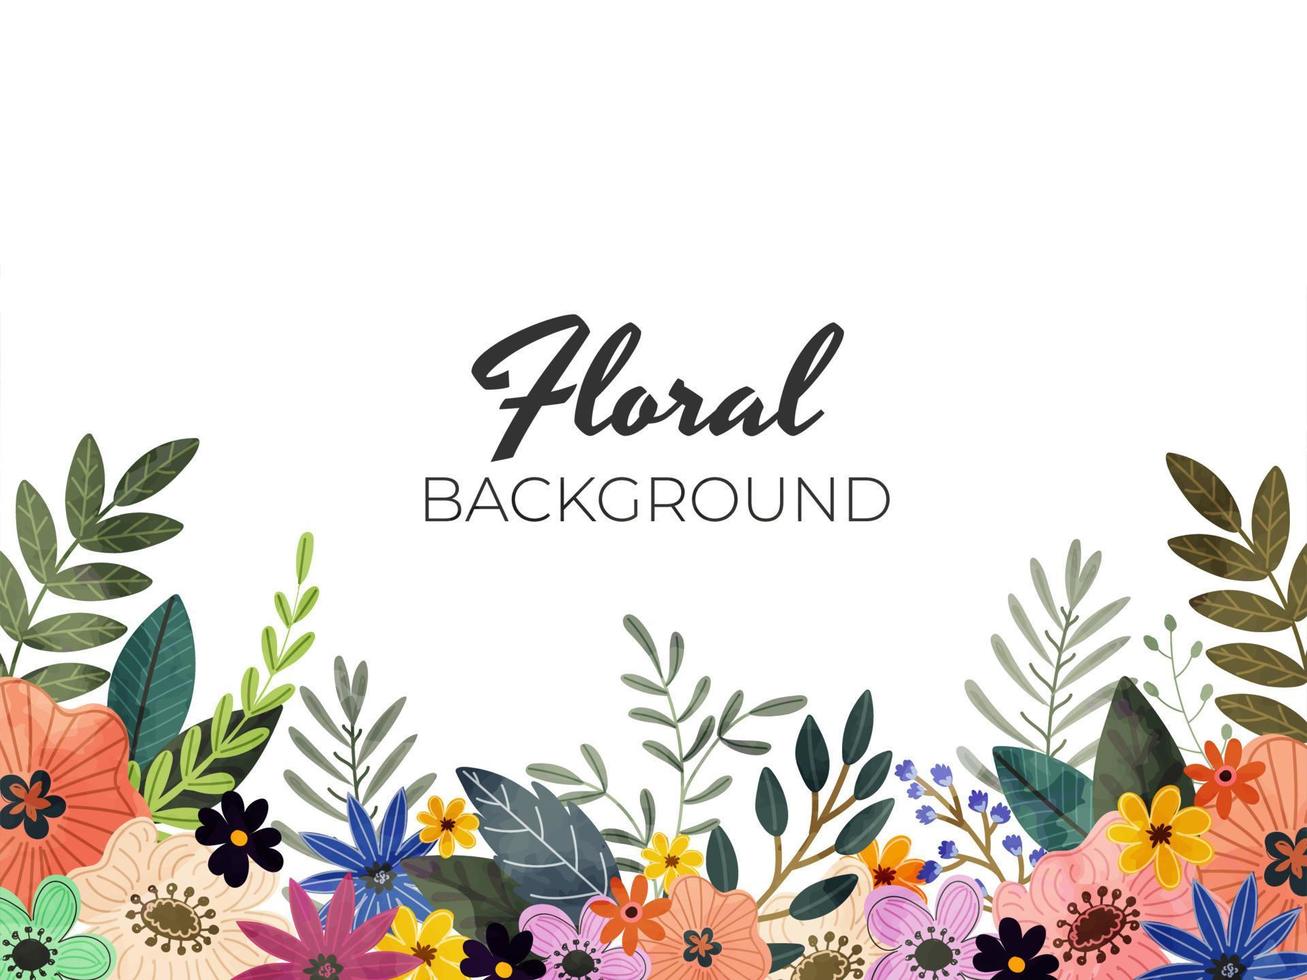 Colorful Flowers with Leaves Decorated on White Background. vector